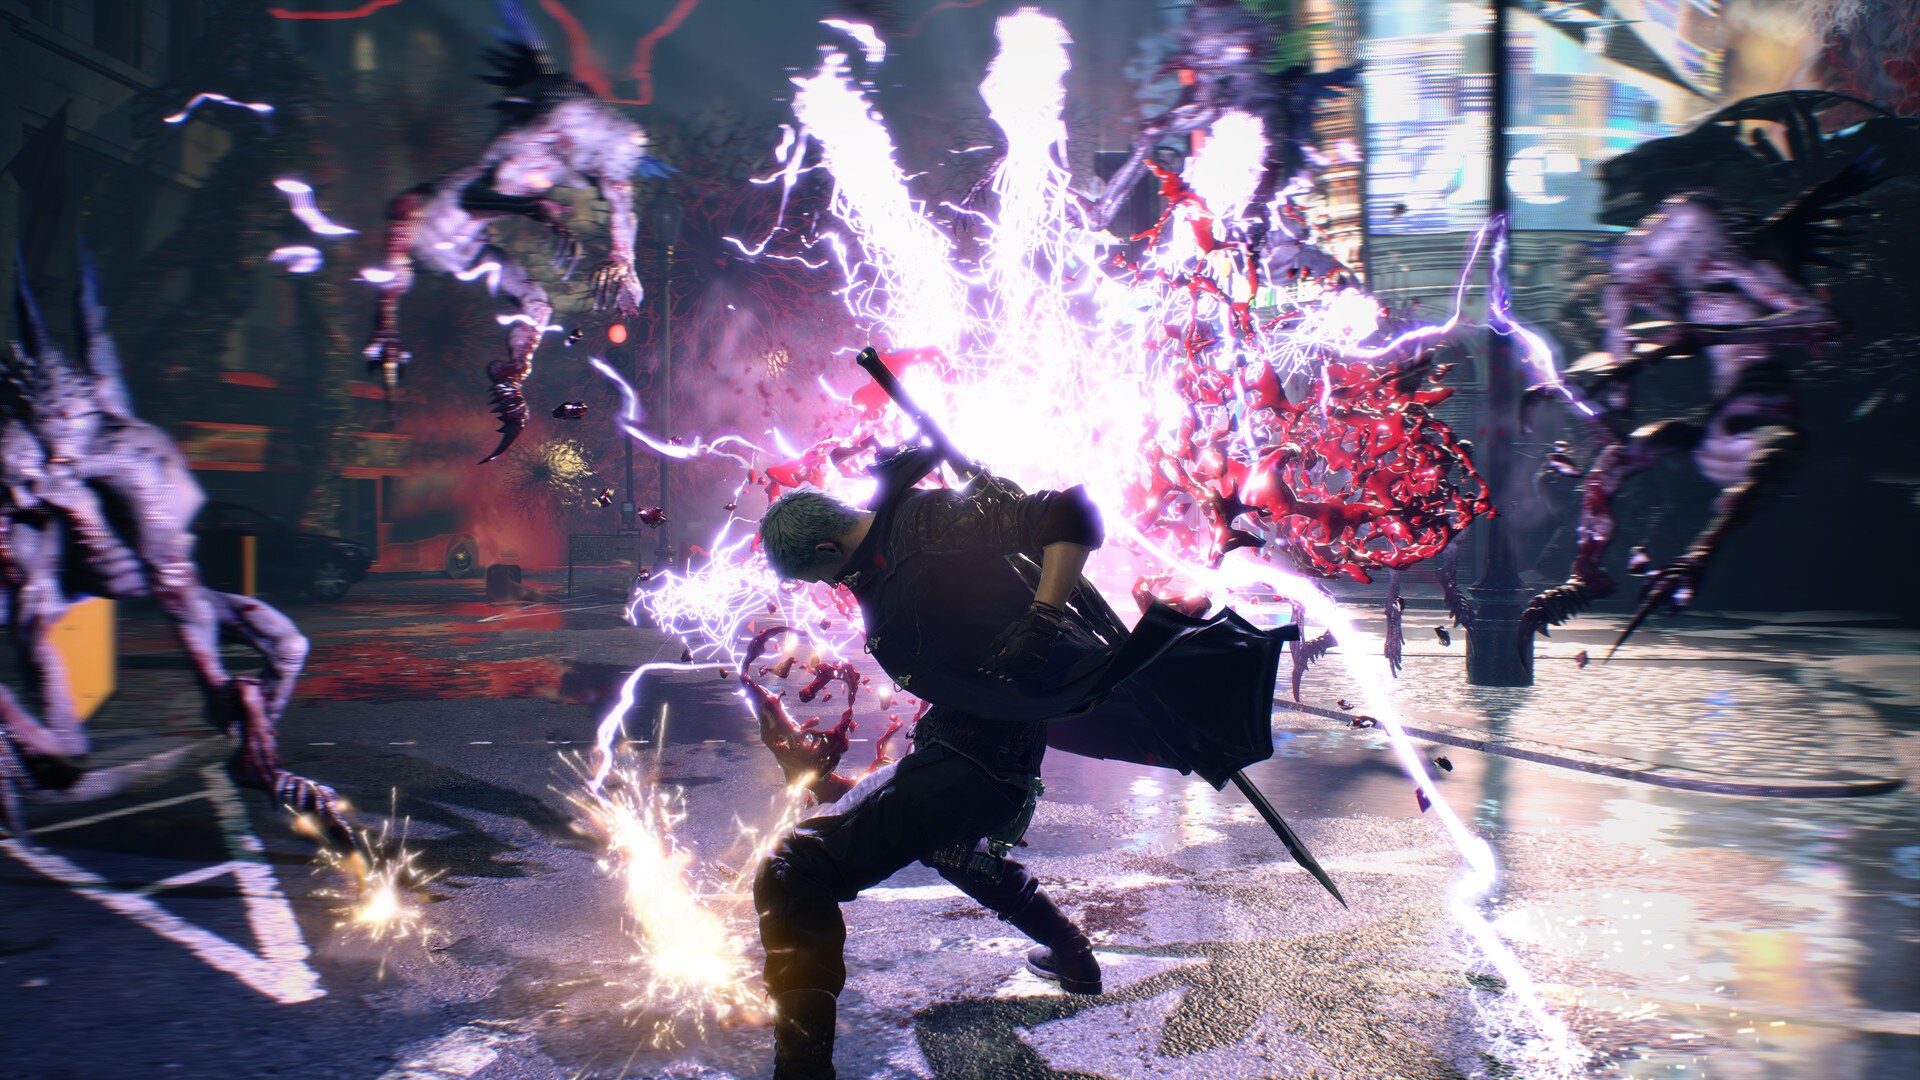 devil may cry 5 g2a